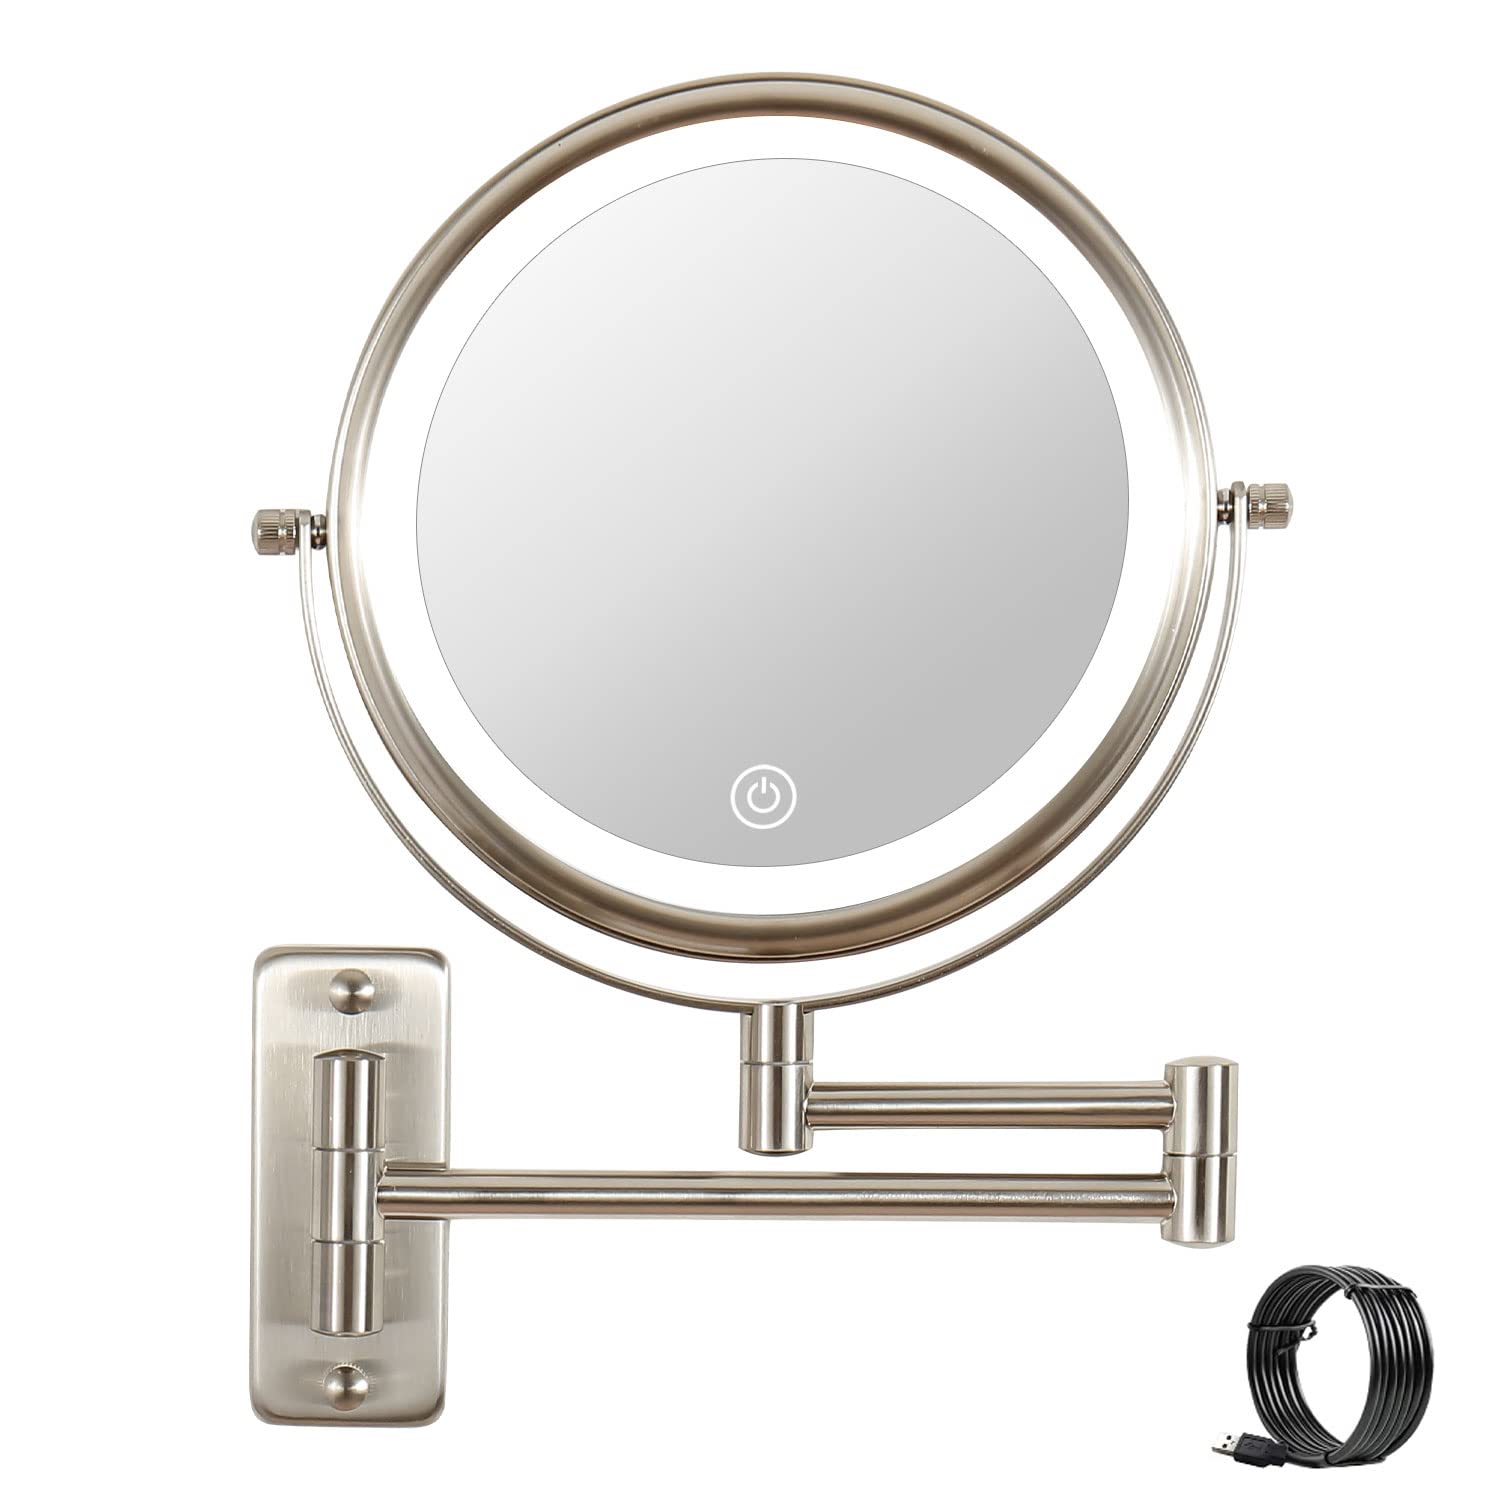 Wall-Mounted Makeup Mirror with Light 8 Inch LED Mirror Touch Switch Adjustable 3 Color Light, 10X Magnification Bathroom Wall Mounted Mirror can R...